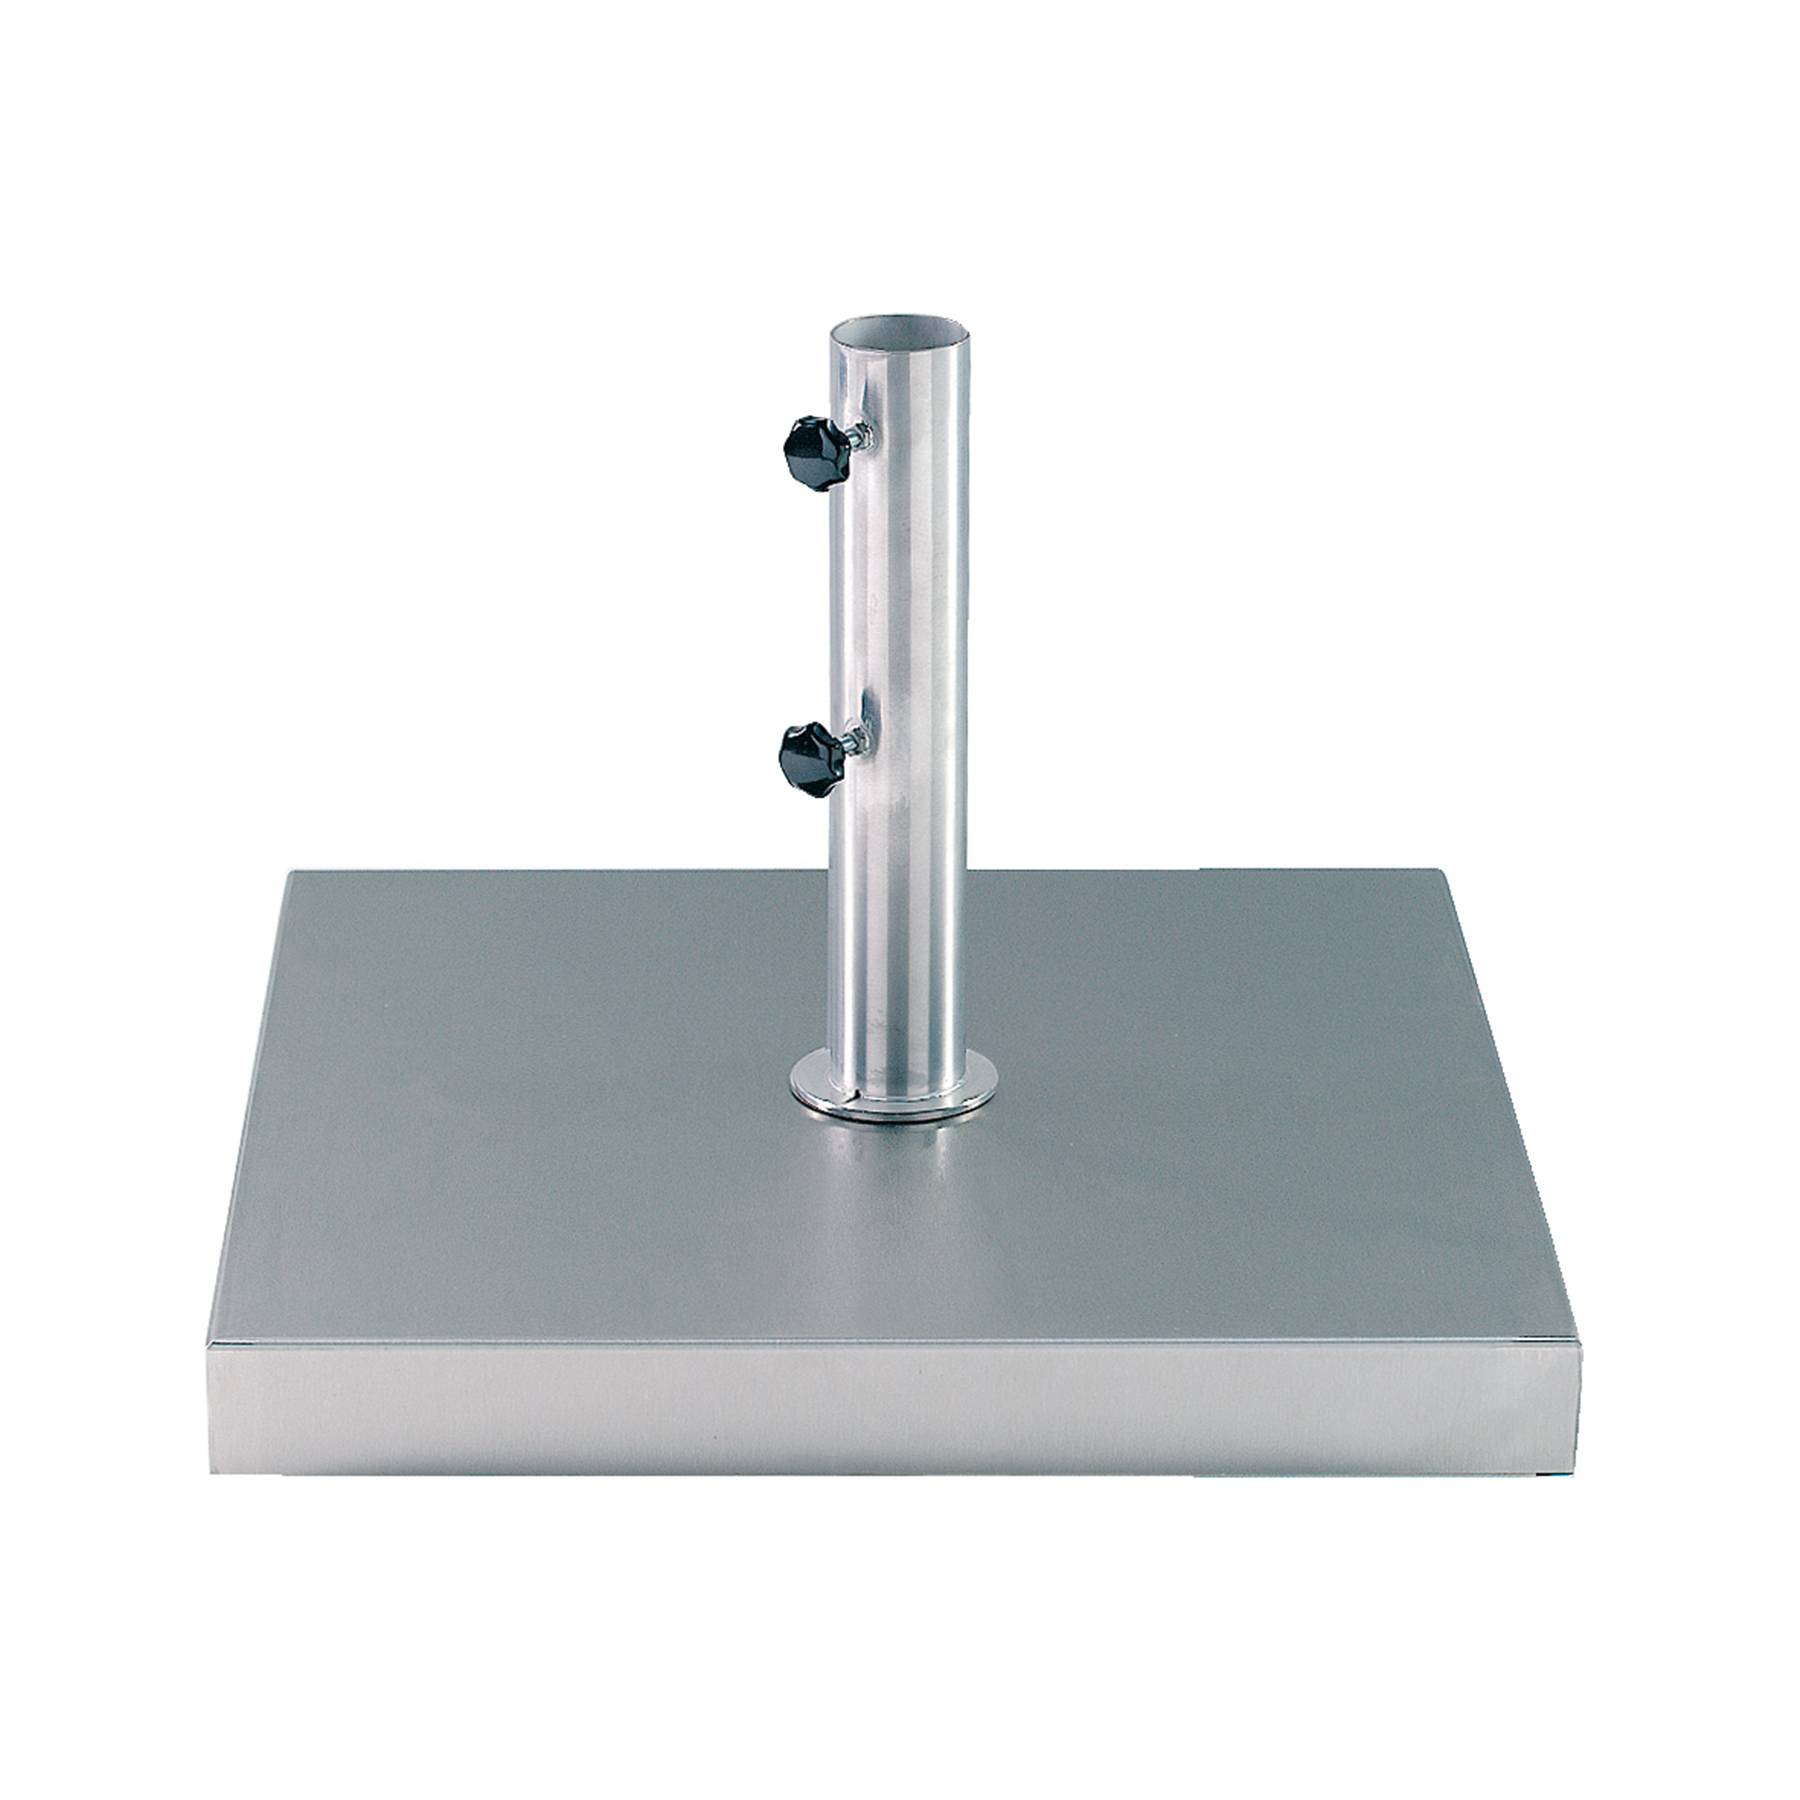 Moby Umbrella Base Stainless Steel Ep 65x65 Cm (Incl. Ceyt65ipep)